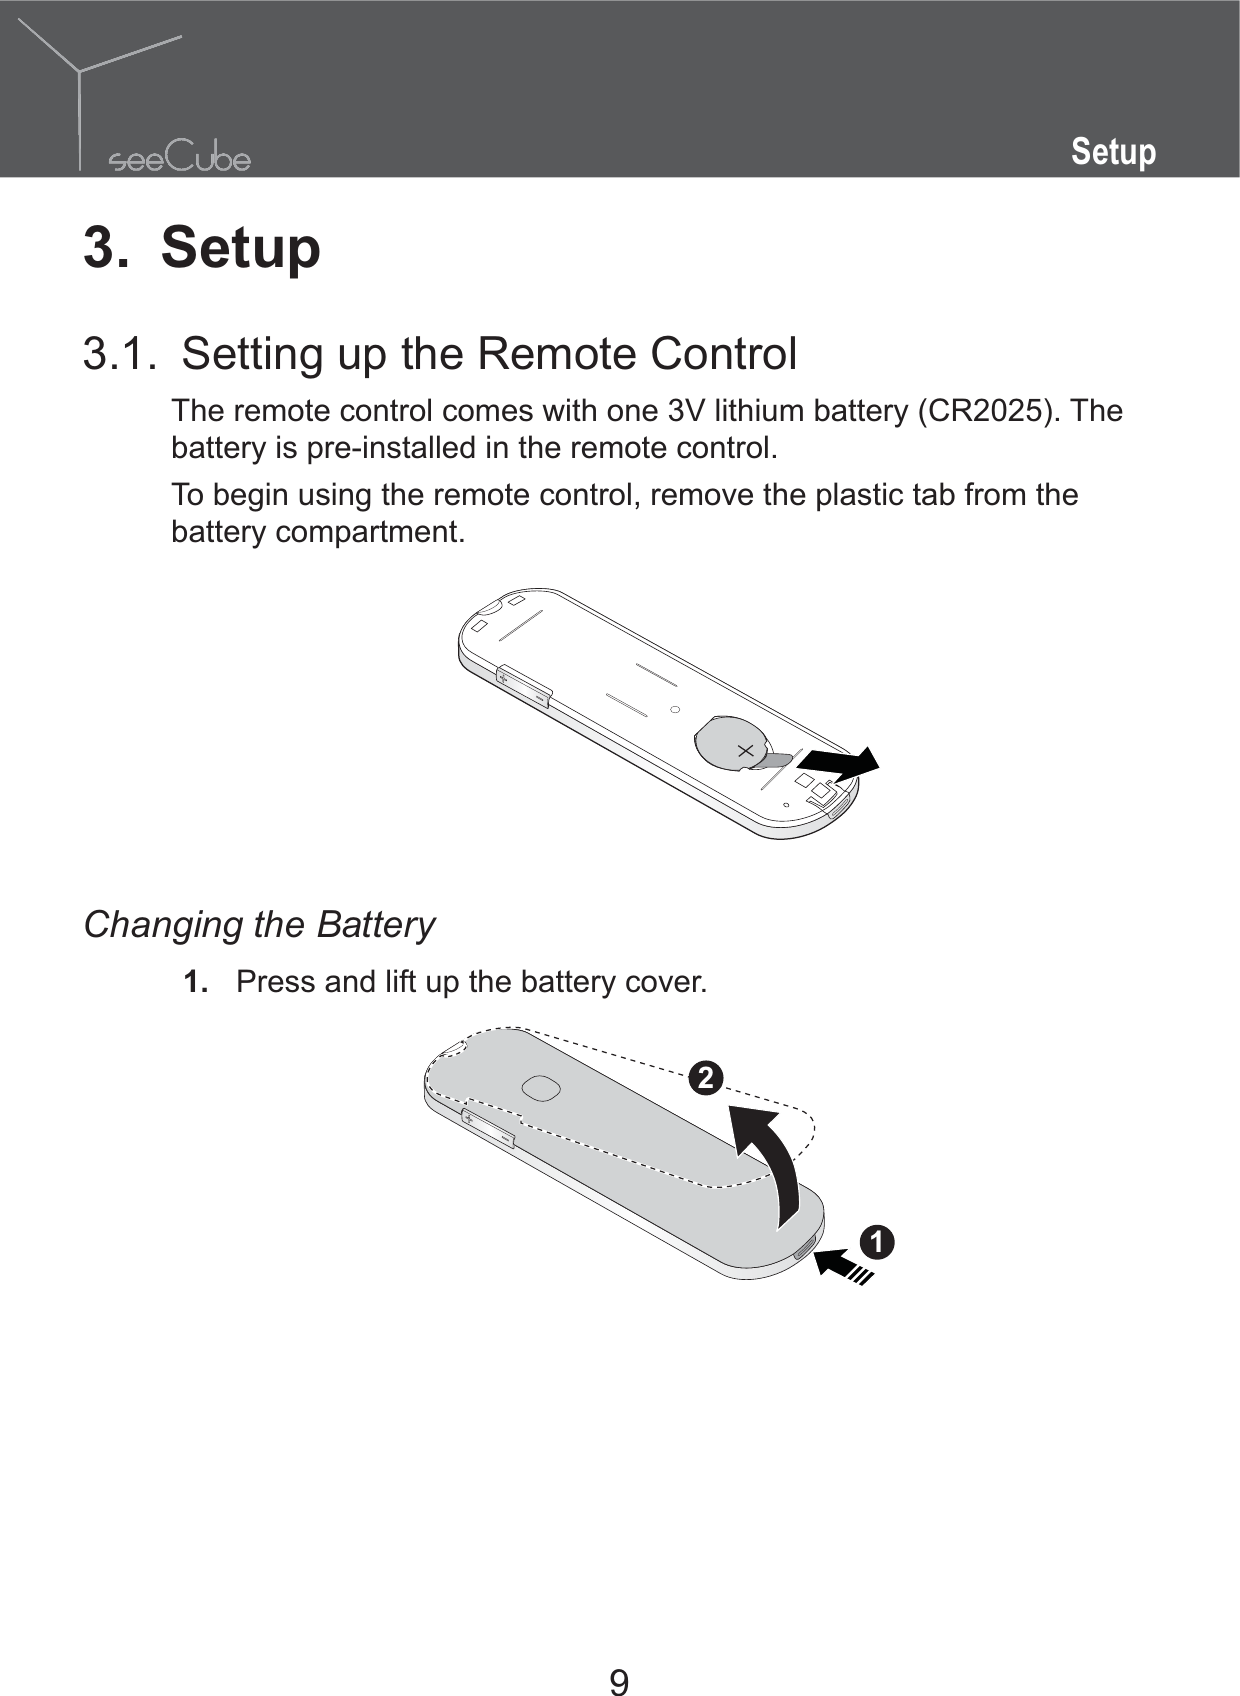 9Setup3. Setup3.1.  Setting up the Remote ControlThe remote control comes with one 3V lithium battery (CR2025). The battery is pre-installed in the remote control.To begin using the remote control, remove the plastic tab from the battery compartment.Changing the Battery1.  Press and lift up the battery cover.12